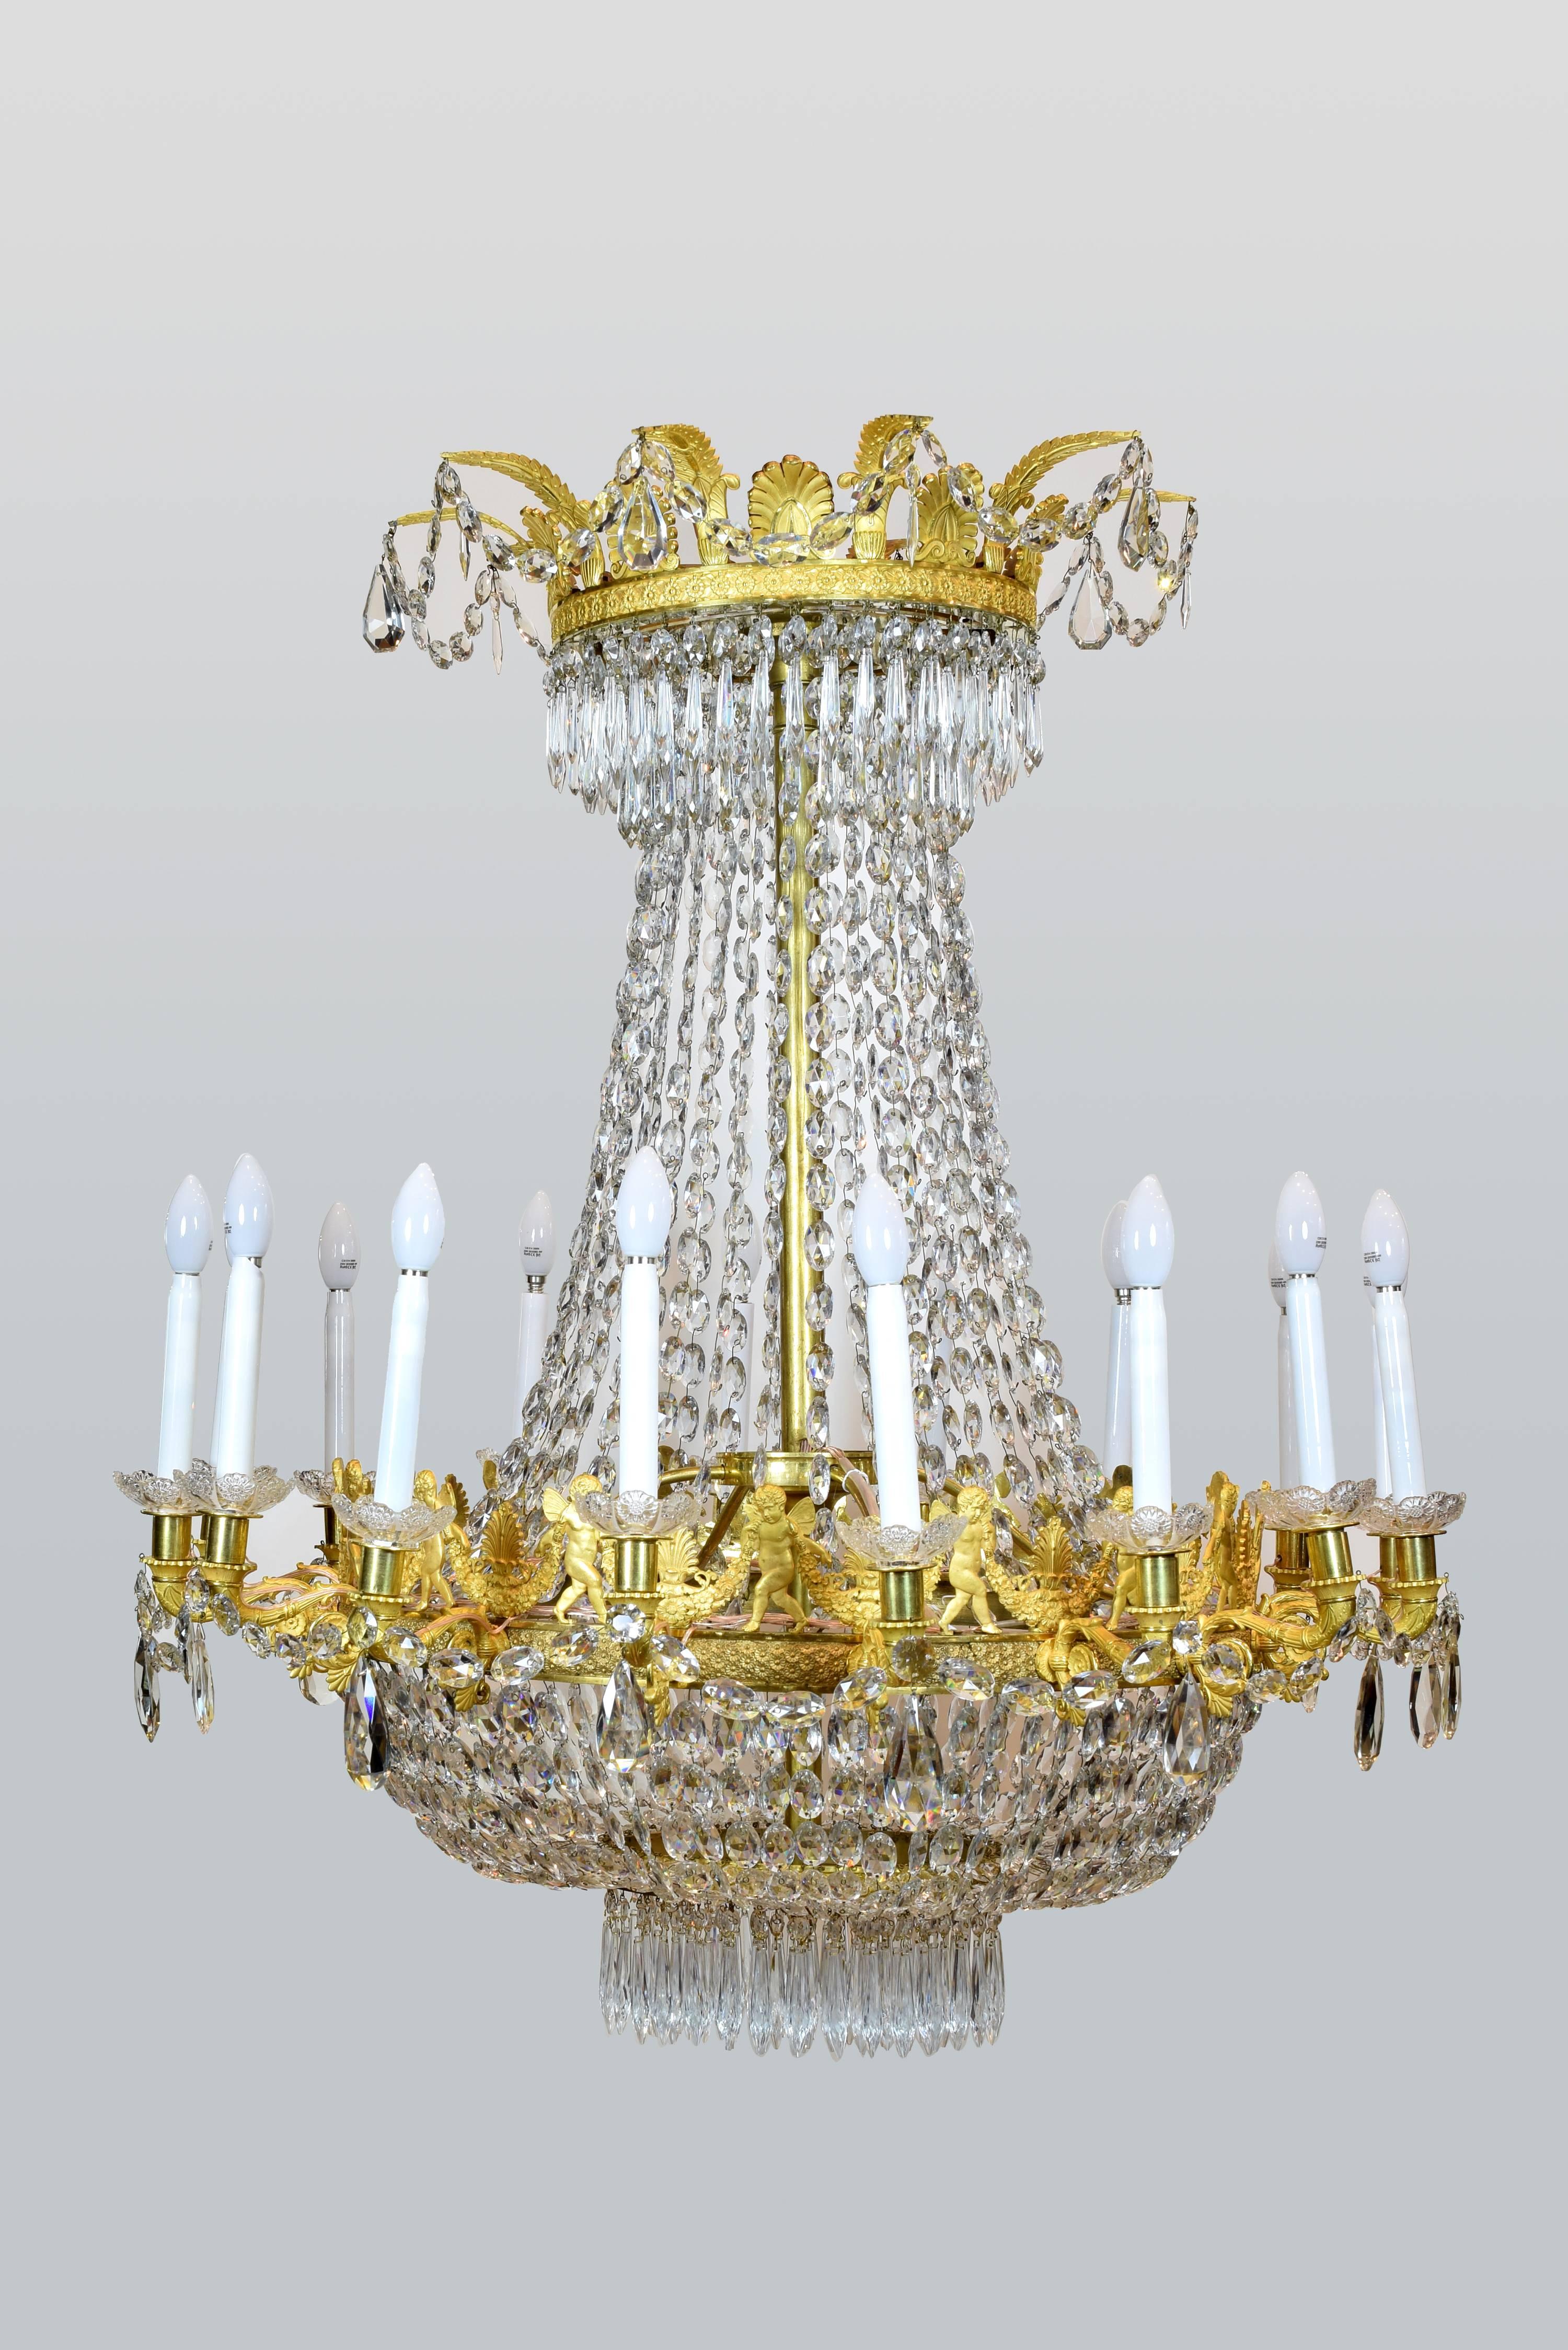 Gilt Empire Bronze and Glass Chandelier, Possibly, Claude Galle, France, circa 1815